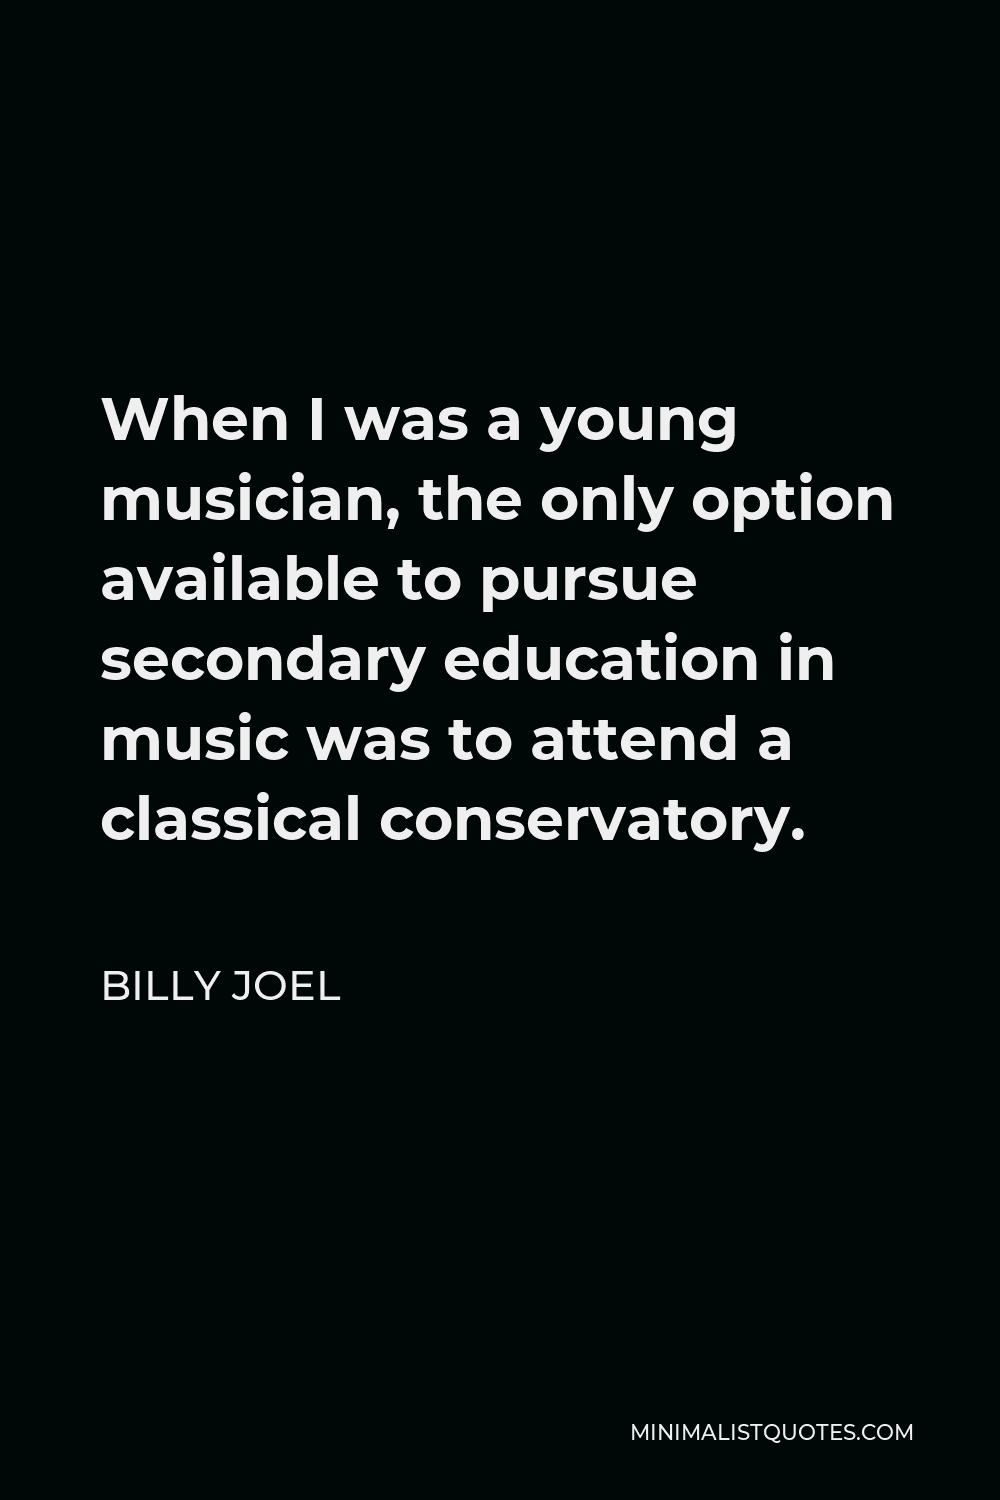 Billy Joel Quote - When I was a young musician, the only option available to pursue secondary education in music was to attend a classical conservatory.